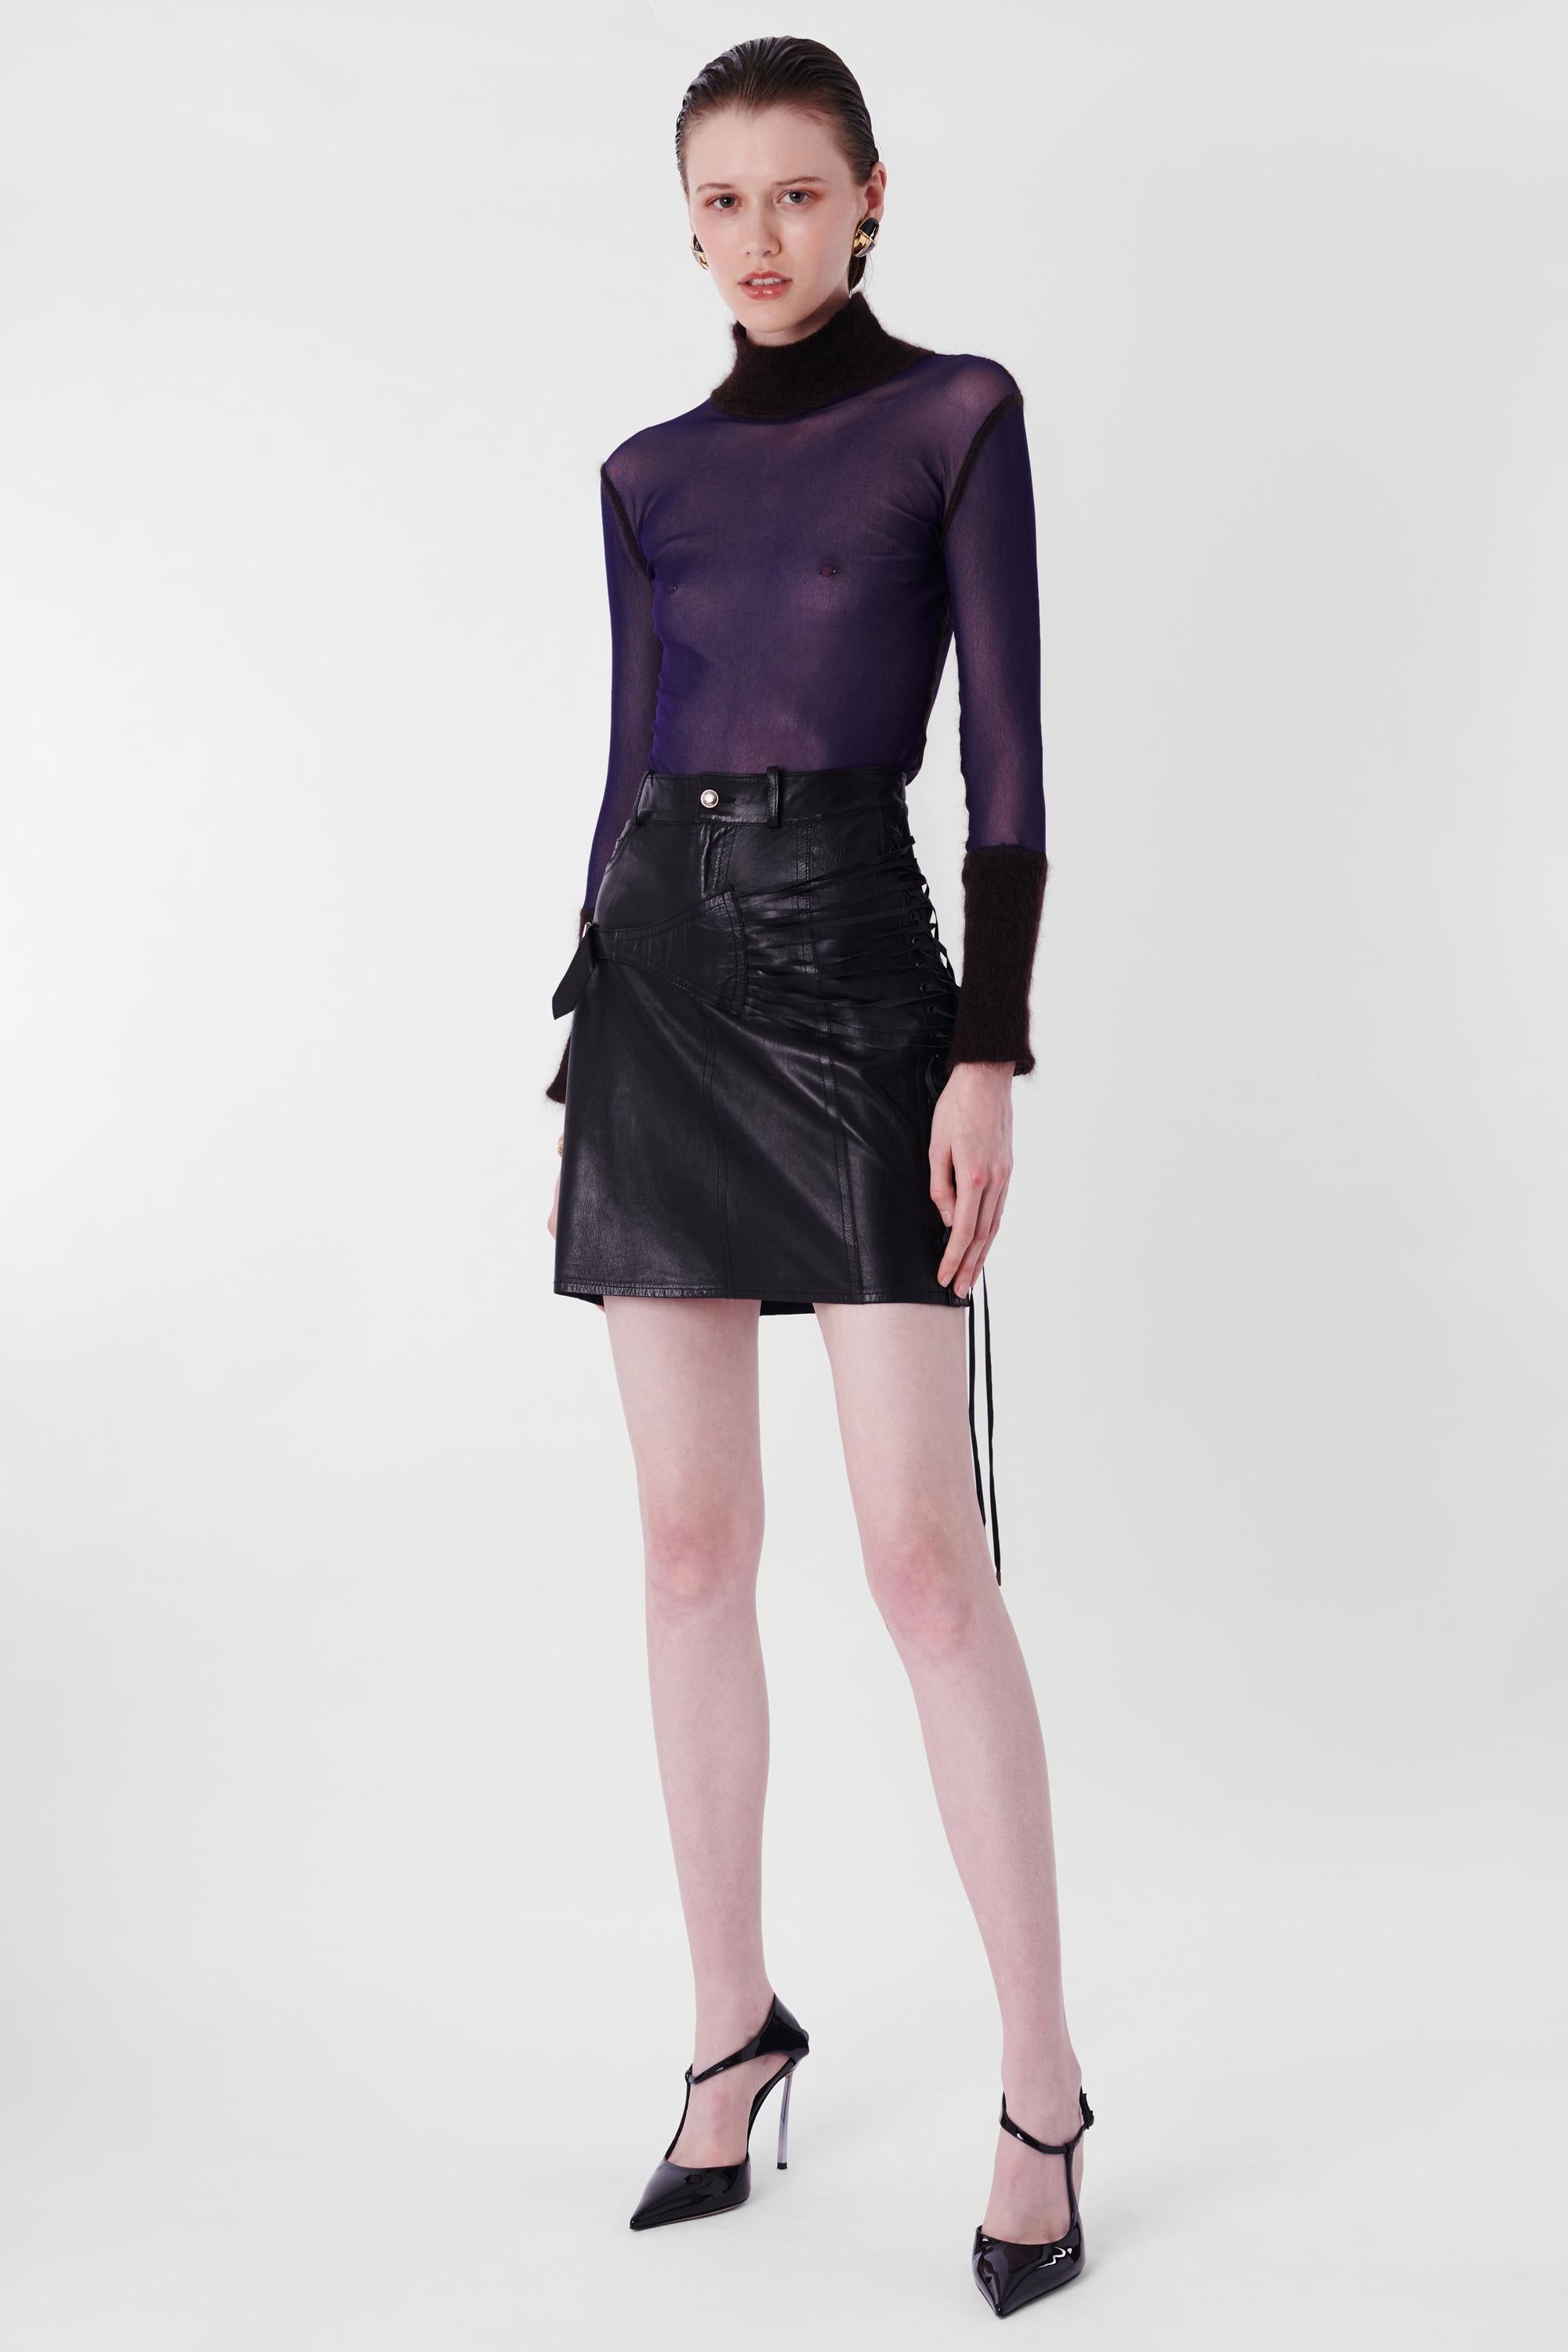 We are excited to present this incredible runway Christian Dior by John Galliano F/W 2003 Black Leather Bondage Mini Skirt. Features lace up side body and bondage detail on hips, zipper and button for closure in mini length. In excellent vintage